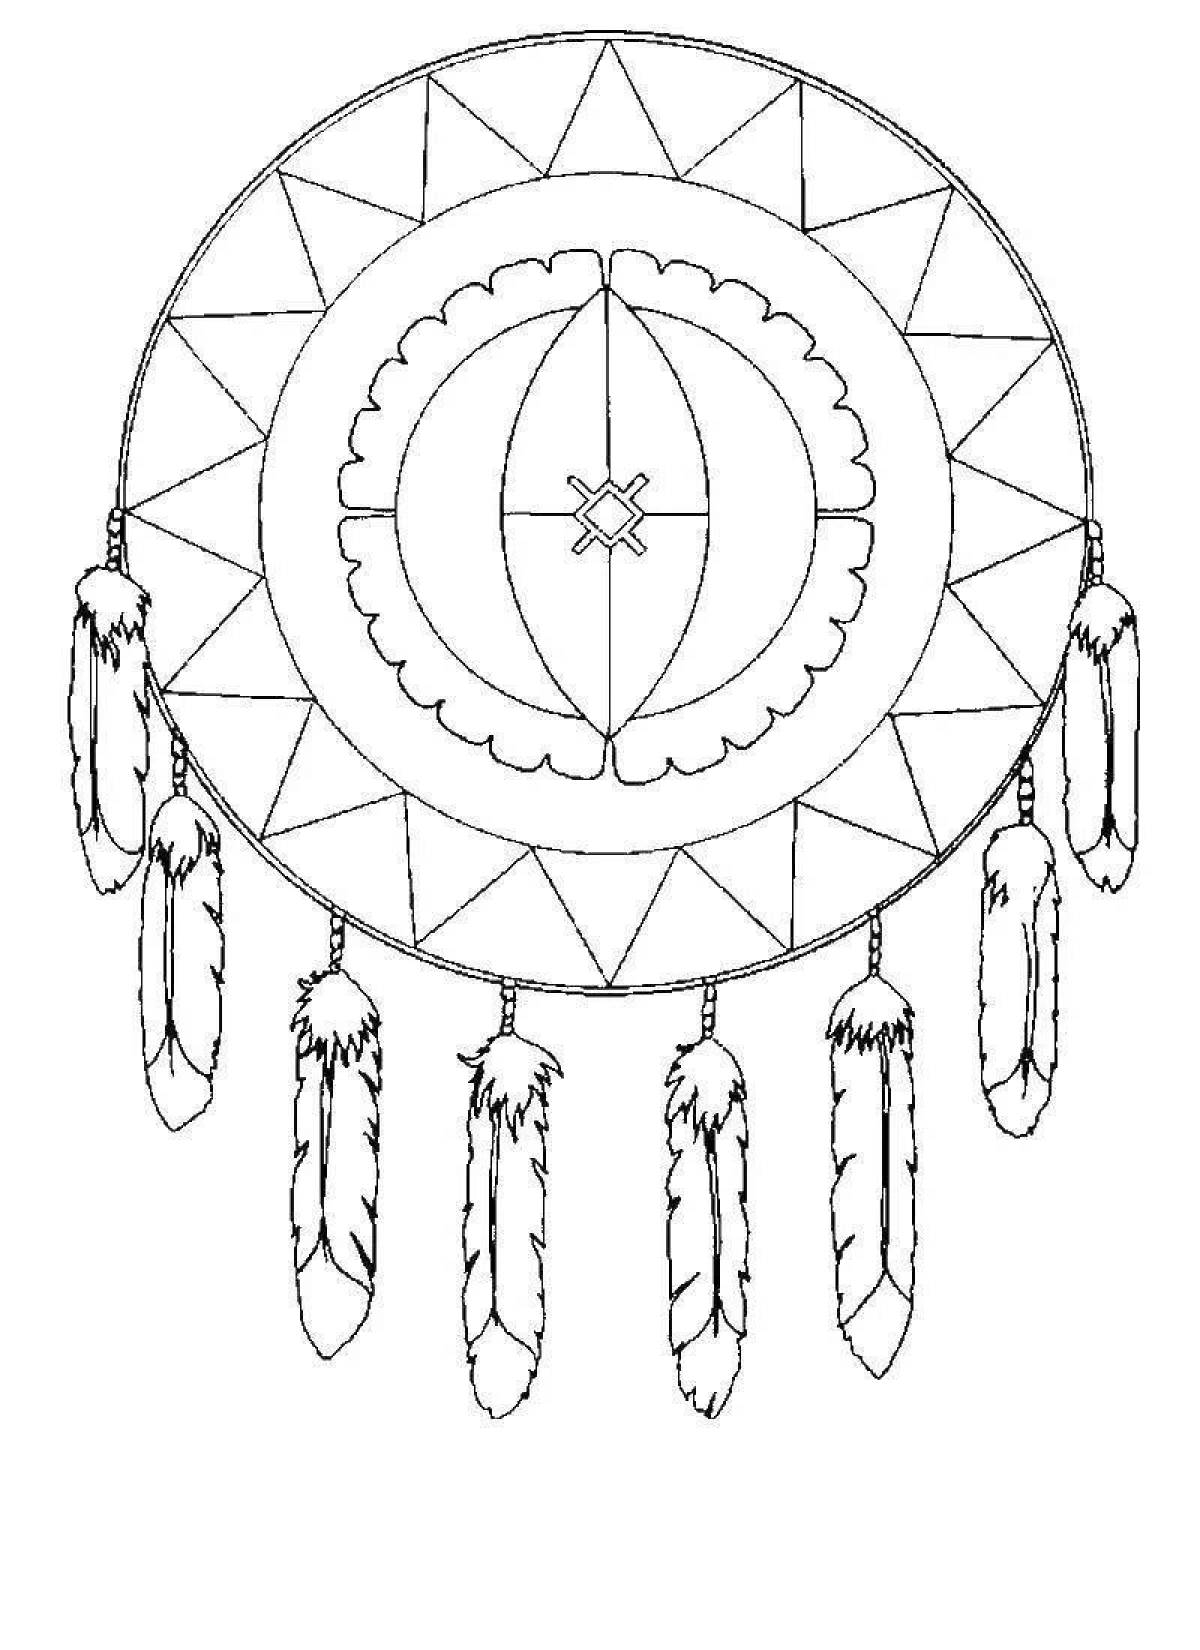 The bewitching amulet coloring page